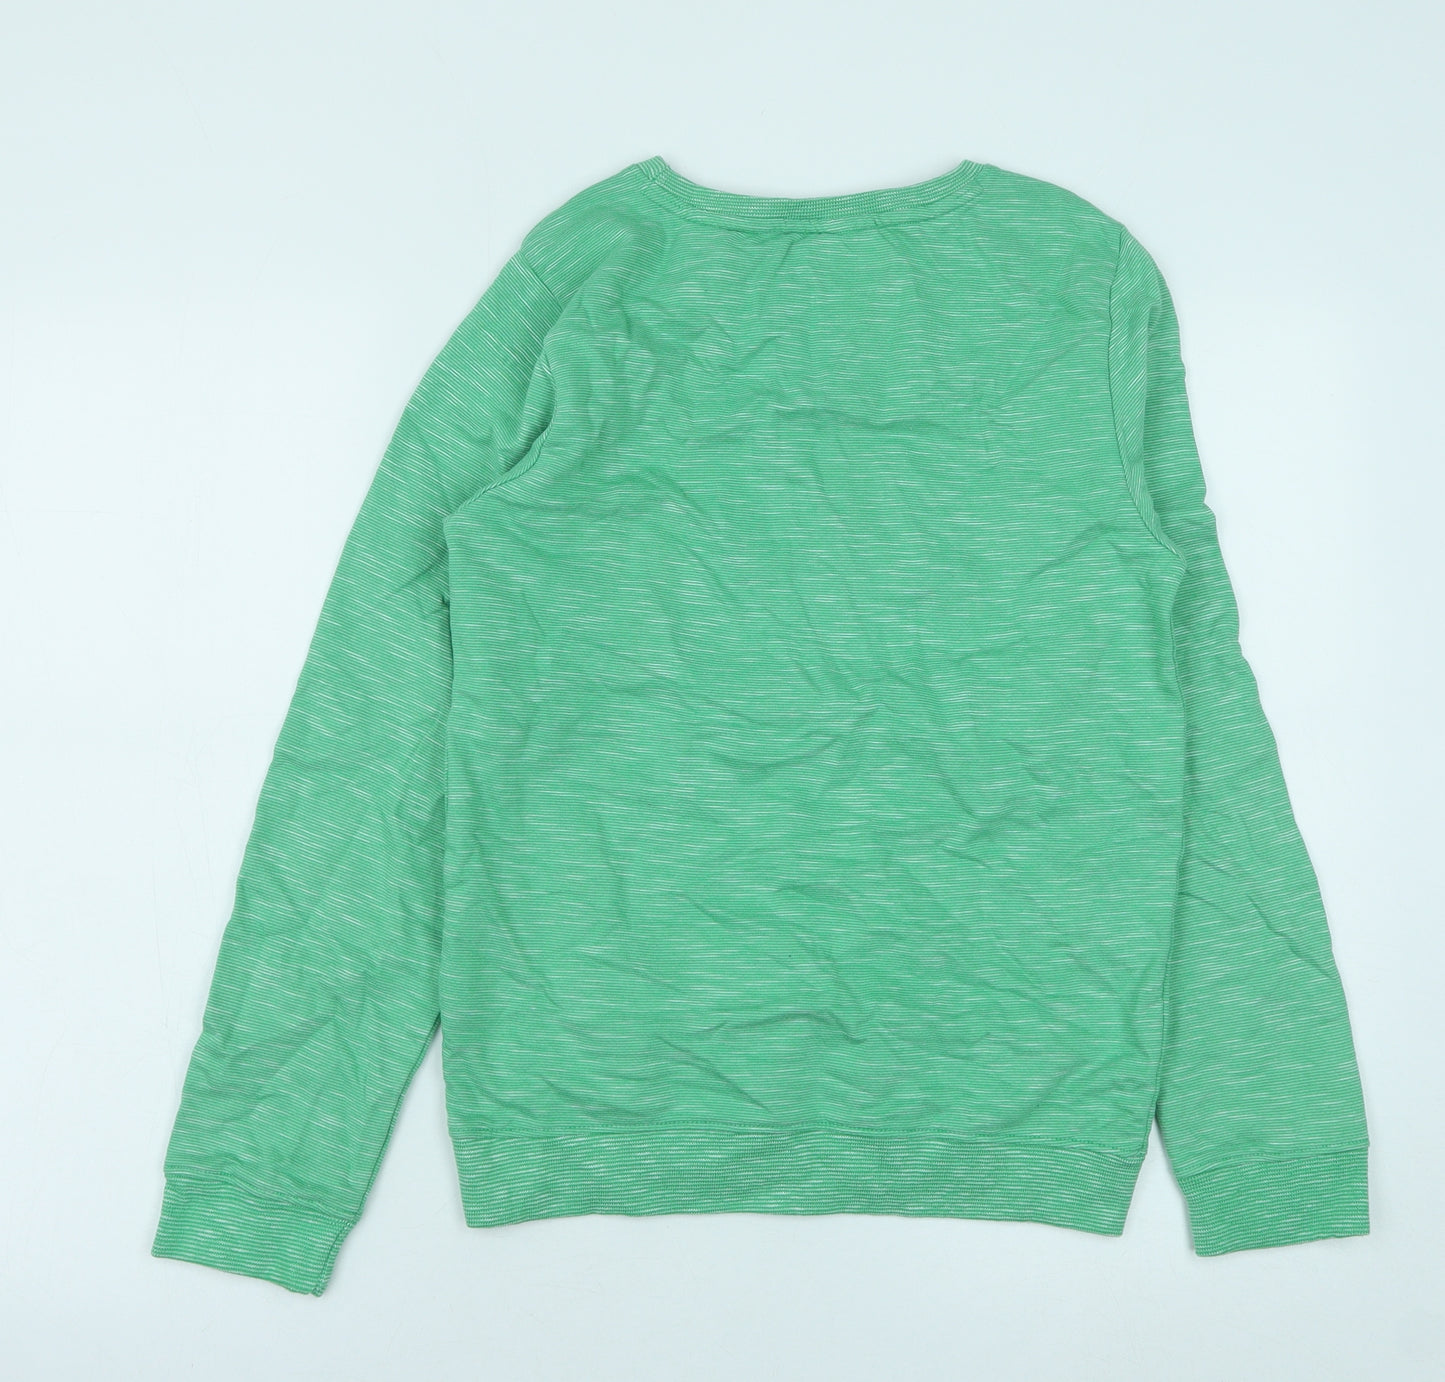 M&Co Boys Green Cotton Pullover Sweatshirt Size 11-12 Years Pullover - Dude